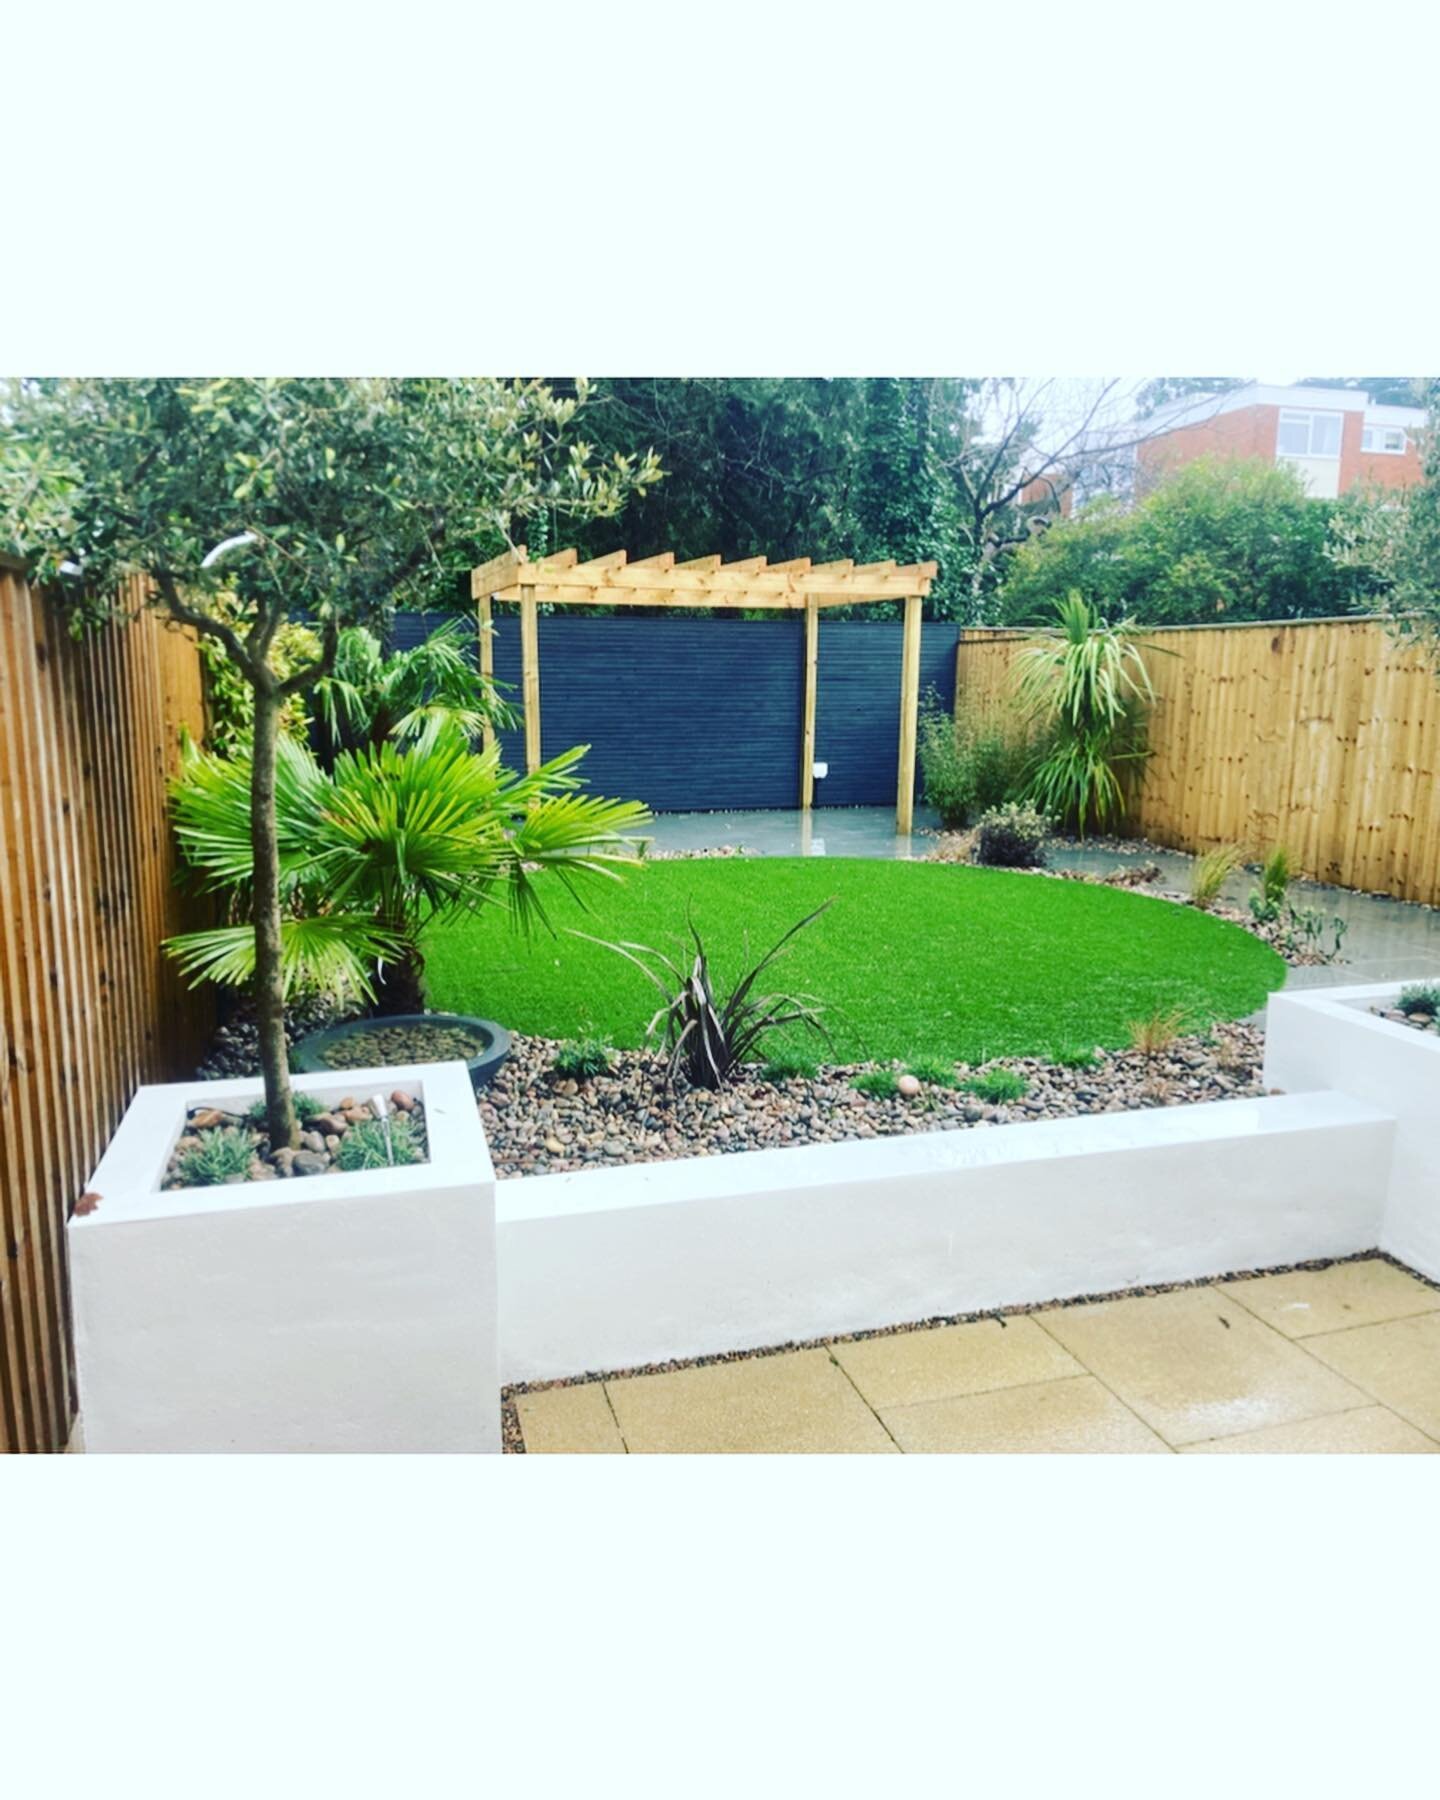 We recently designed and built this small garden in Branksome park. The garden was a blank canvas. The house is a 2nd home so low maintenance was a consideration. The owner wanted an entertaining space and somewhere to relax and enjoy. 

#gardendesig